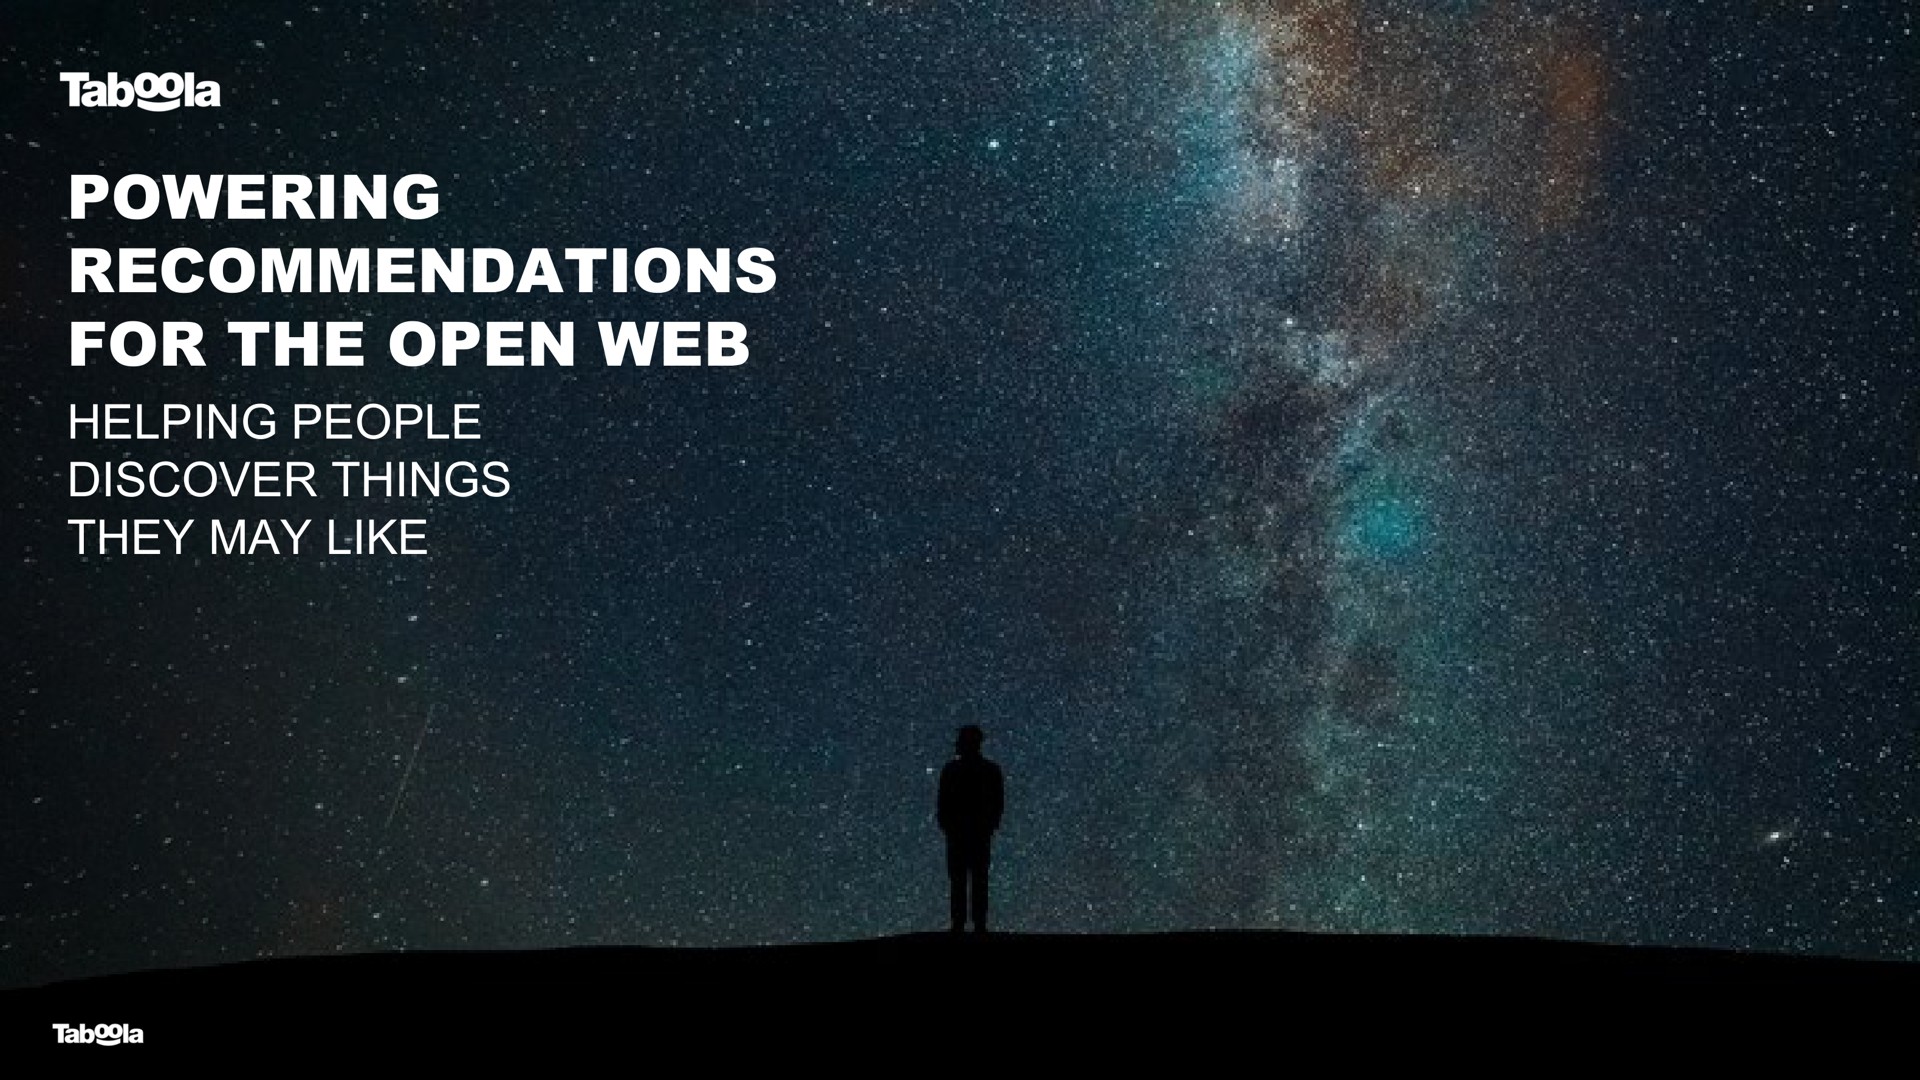 powering recommendations for the open web | Taboola